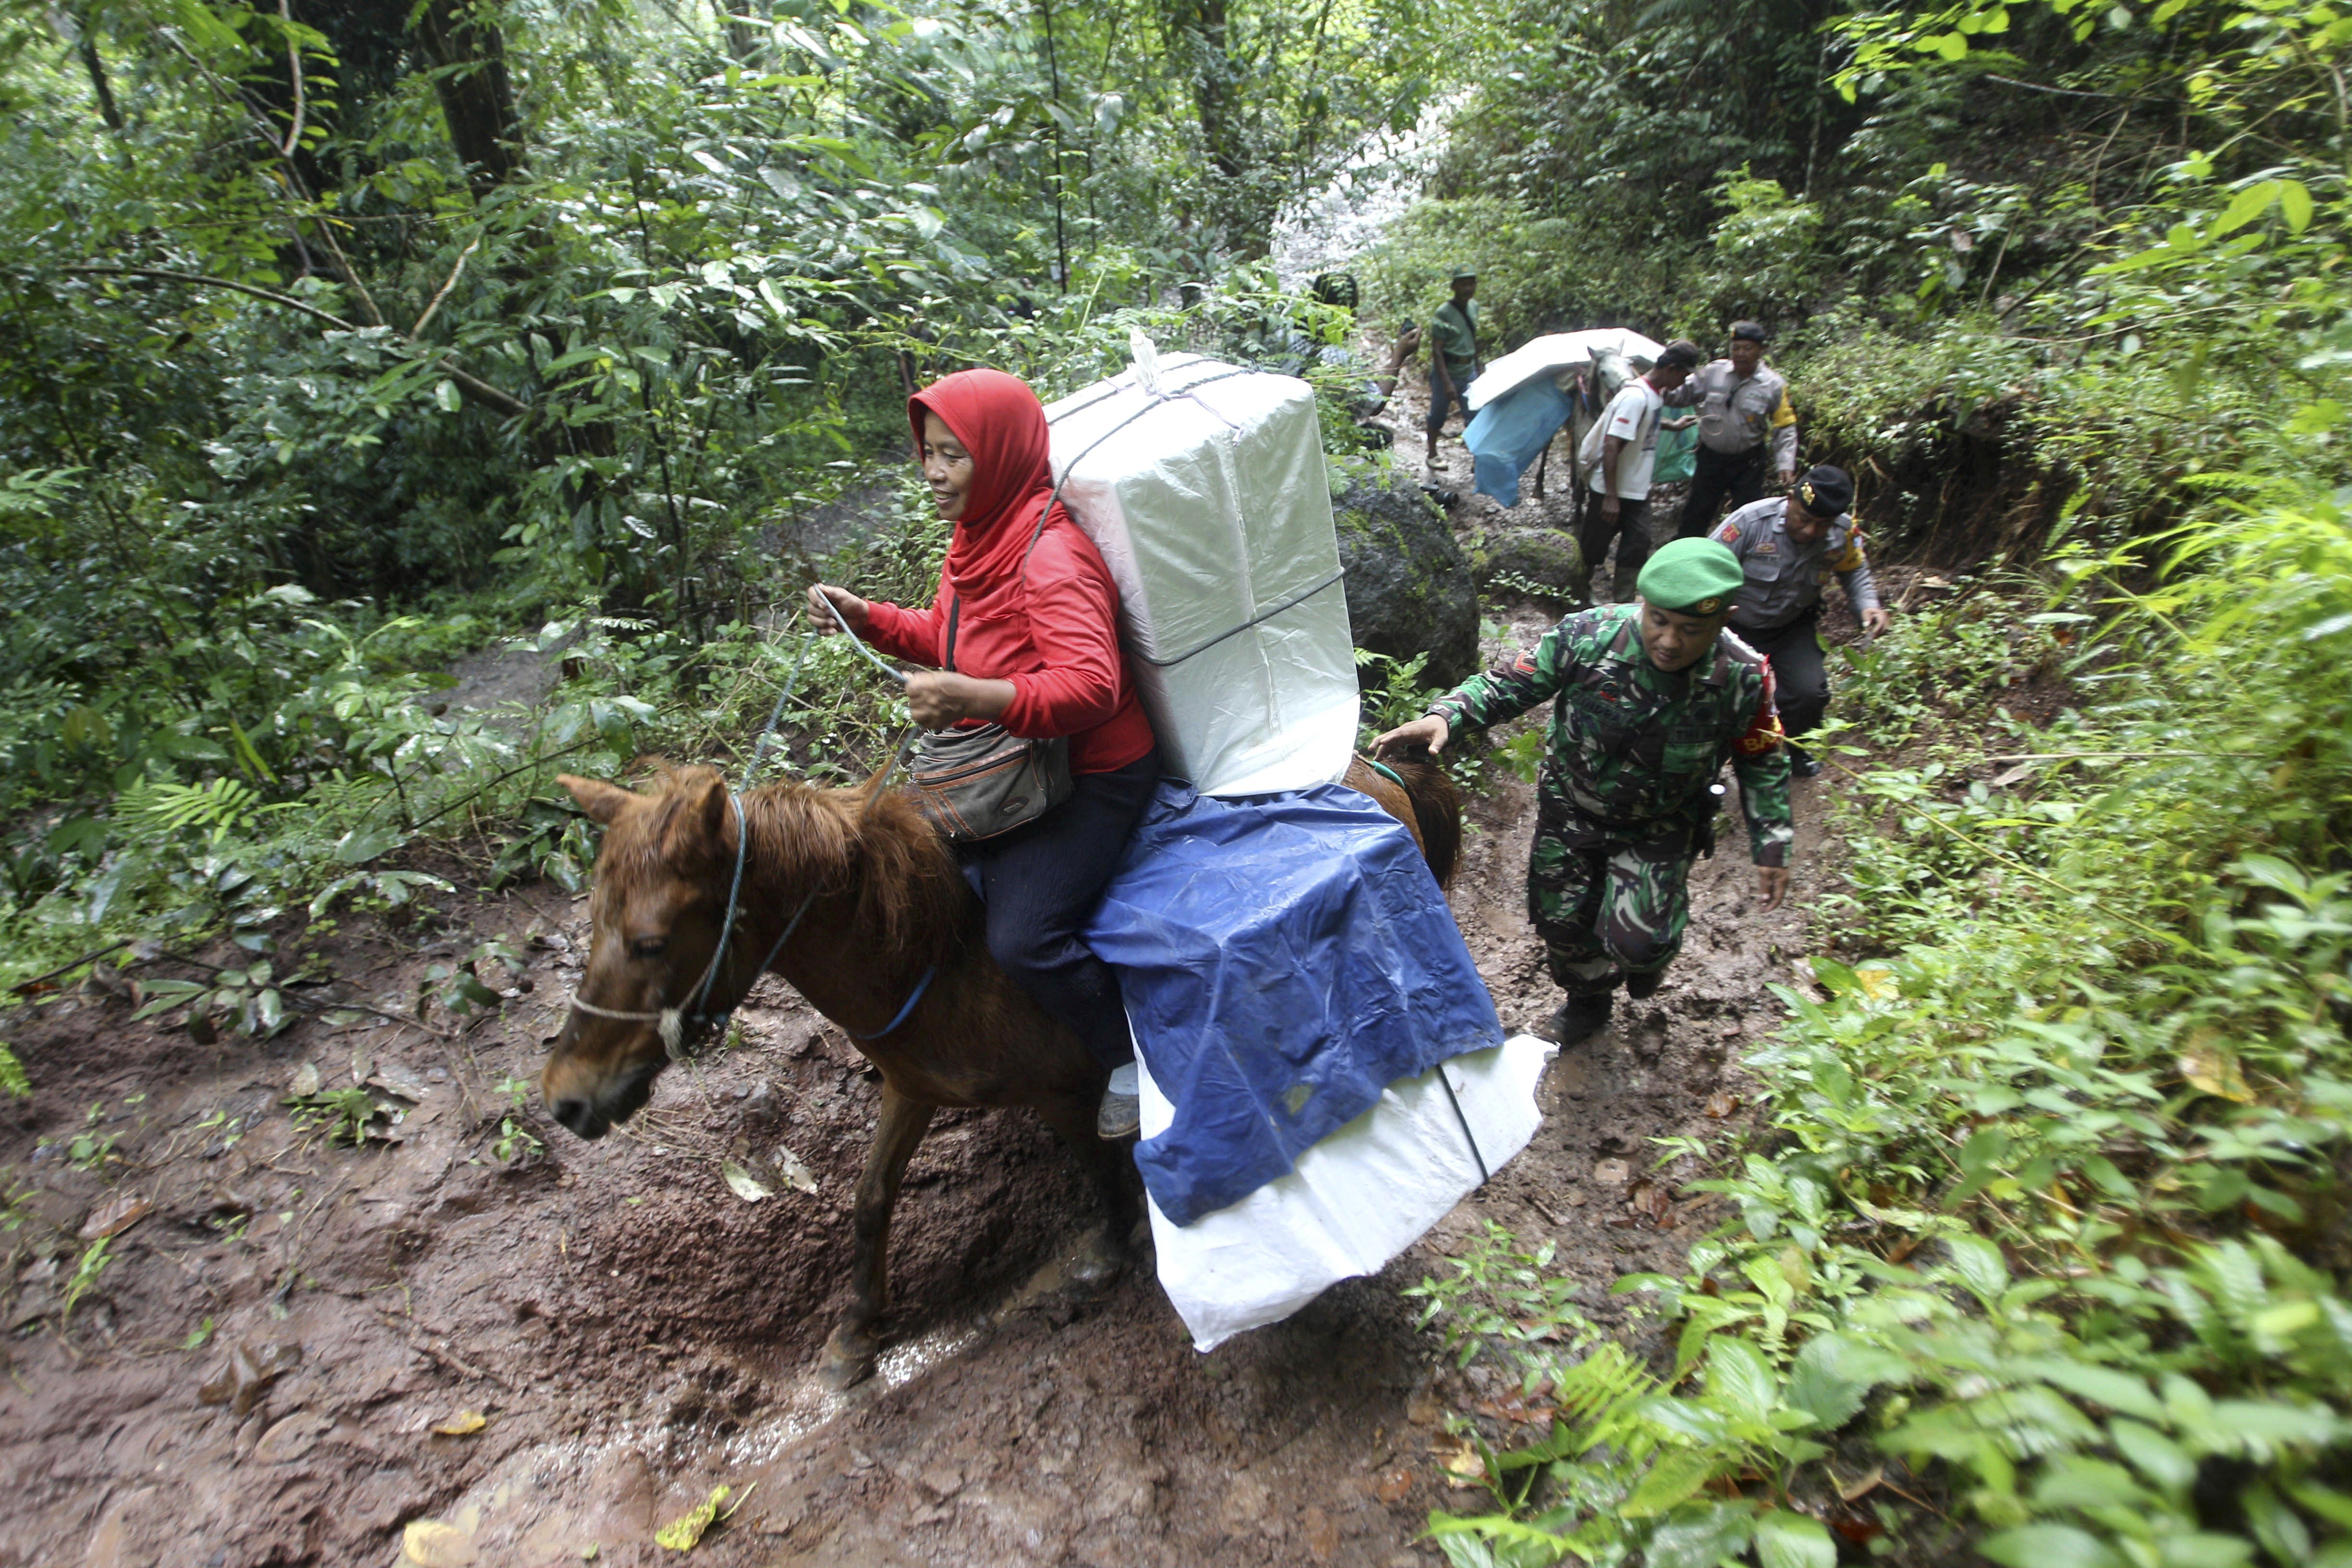 Police officers and soldiers escort electoral workers using horses to distribute ballot boxes and other election paraphernalia to polling stations in remote villages in Tempurejo, East Java. Photo: AP